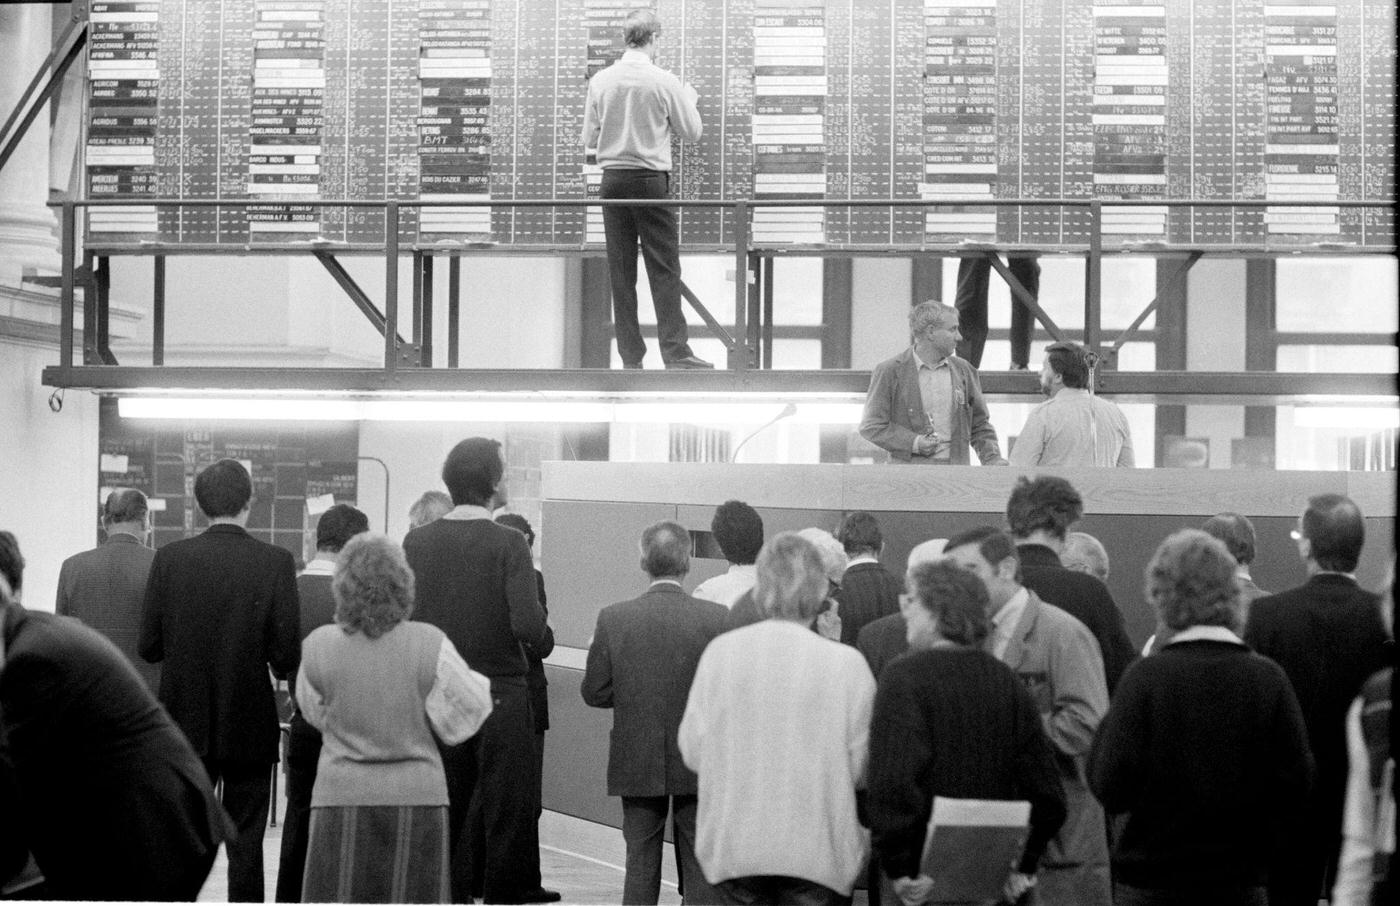 Trading Floor and Value Board at the Brussels Stock Exchange, 1987